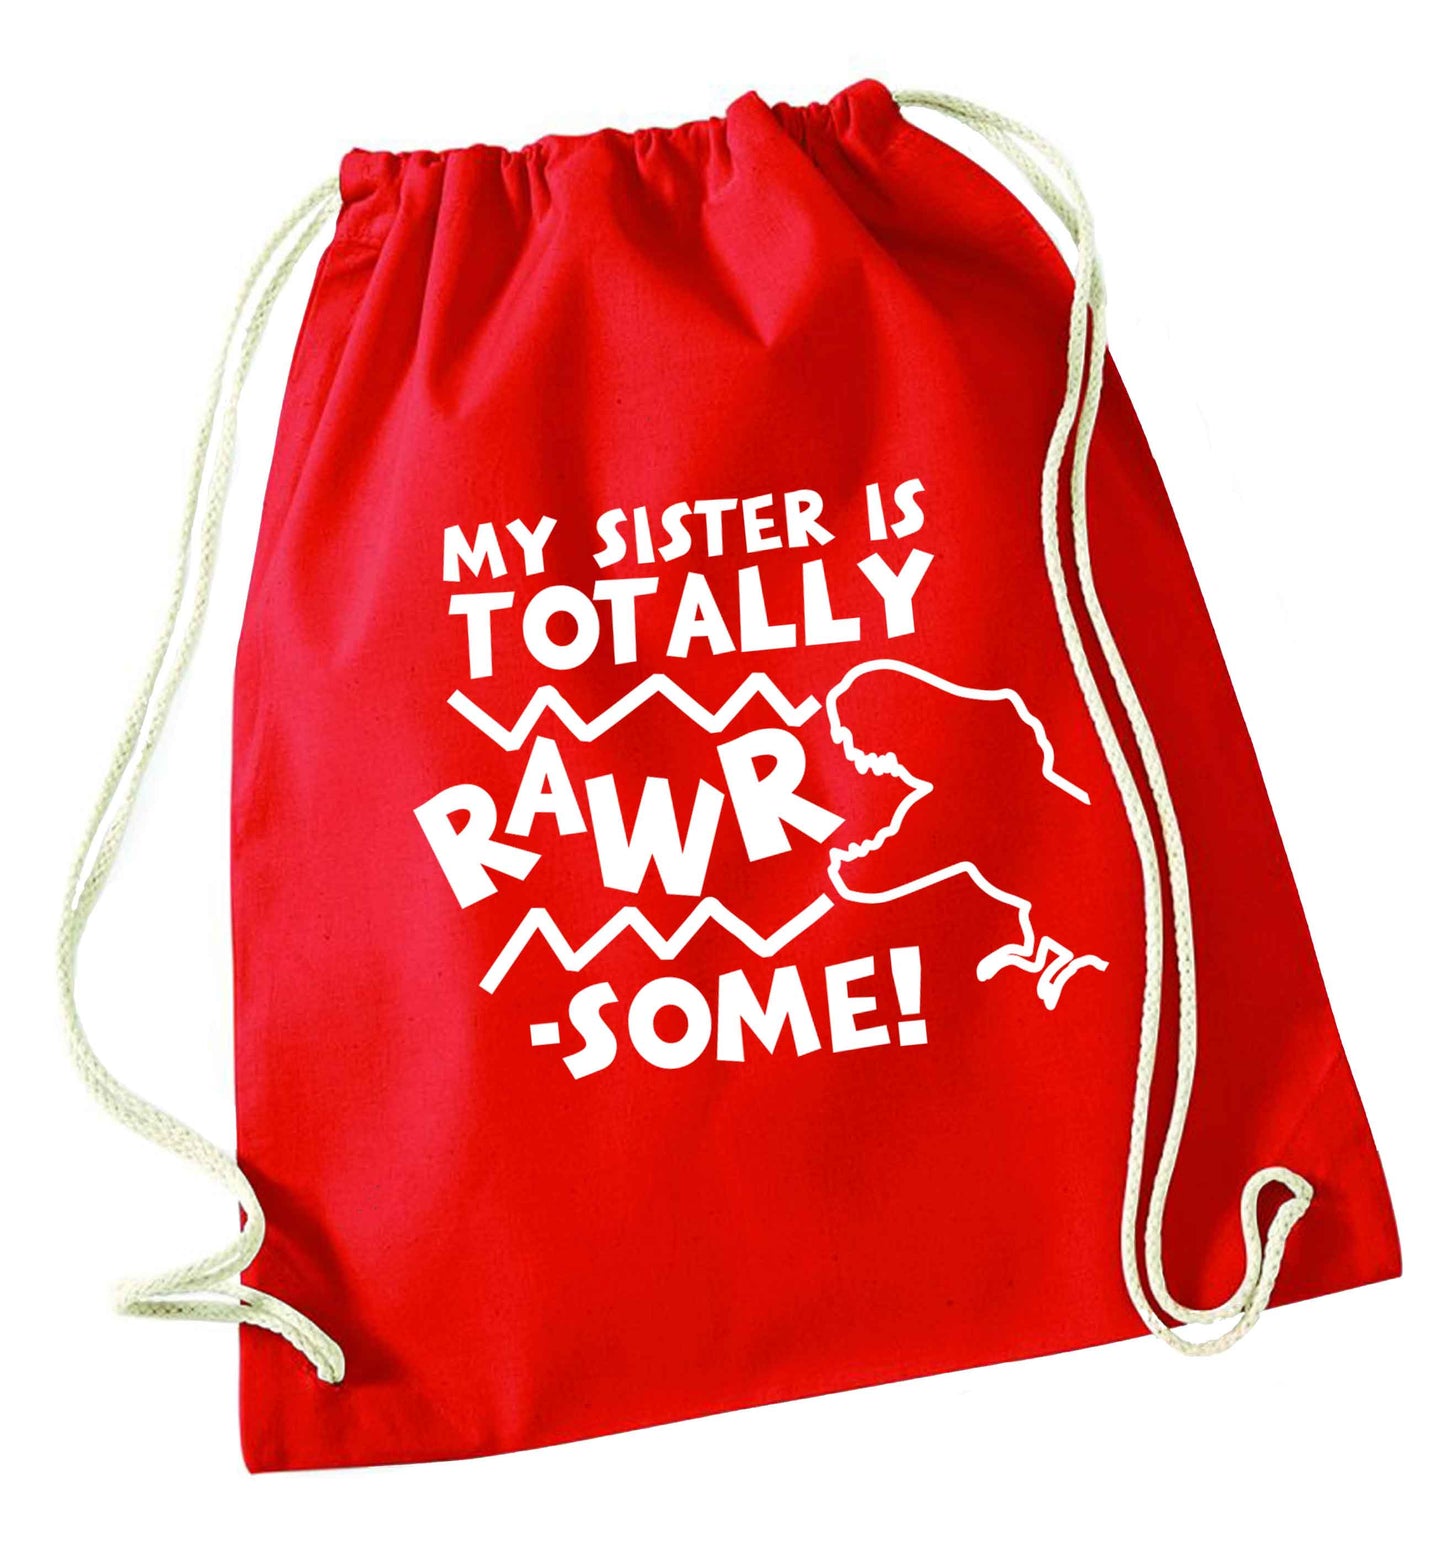 My sister is totally rawrsome red drawstring bag 